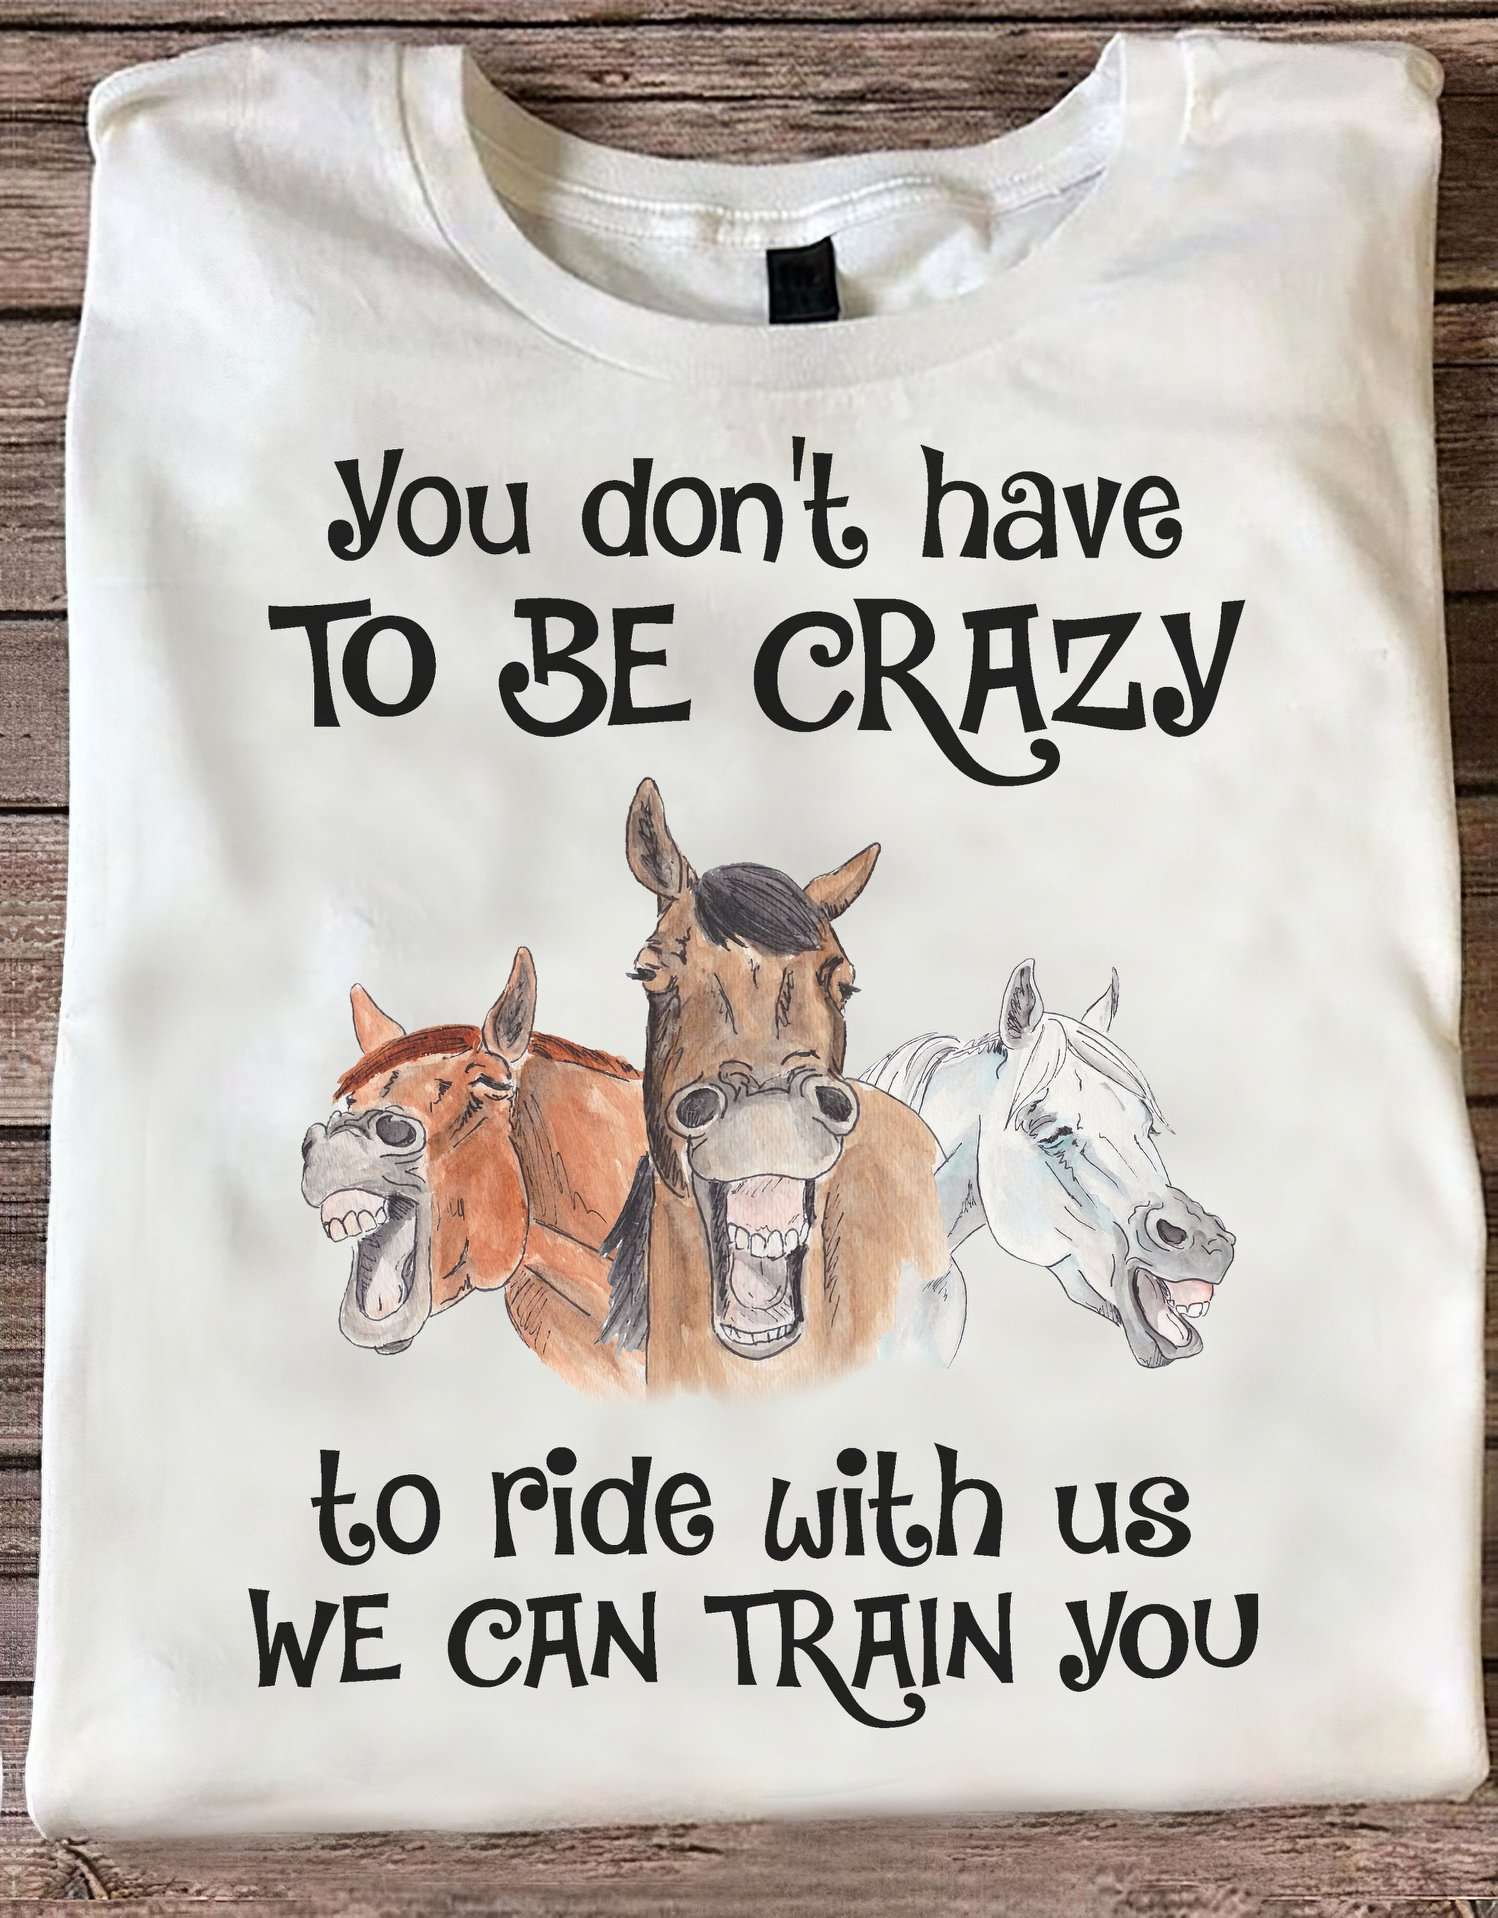 You don't have to be crazy to ride with us, we can train you - Funny horse graphic T-shirt